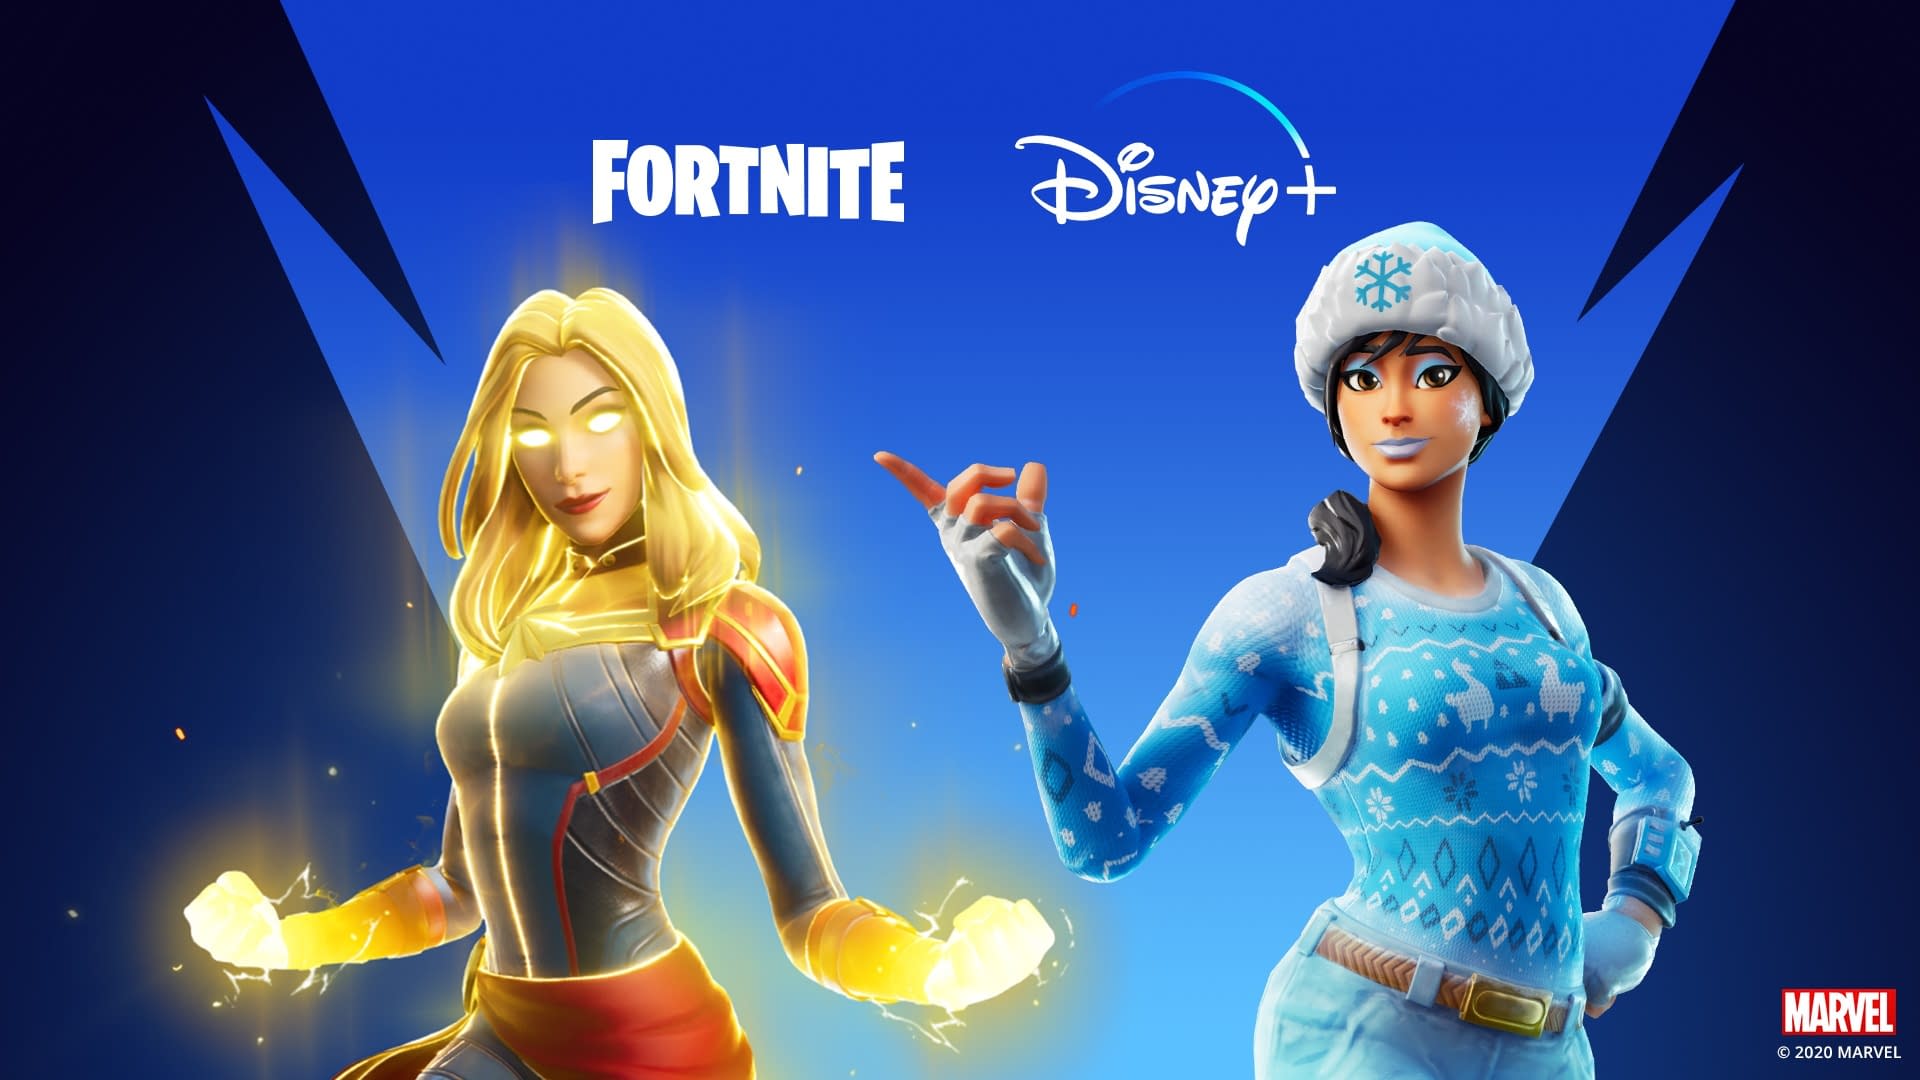 Fortnite Teams With Disney+ For A Special 24-Hour Deal